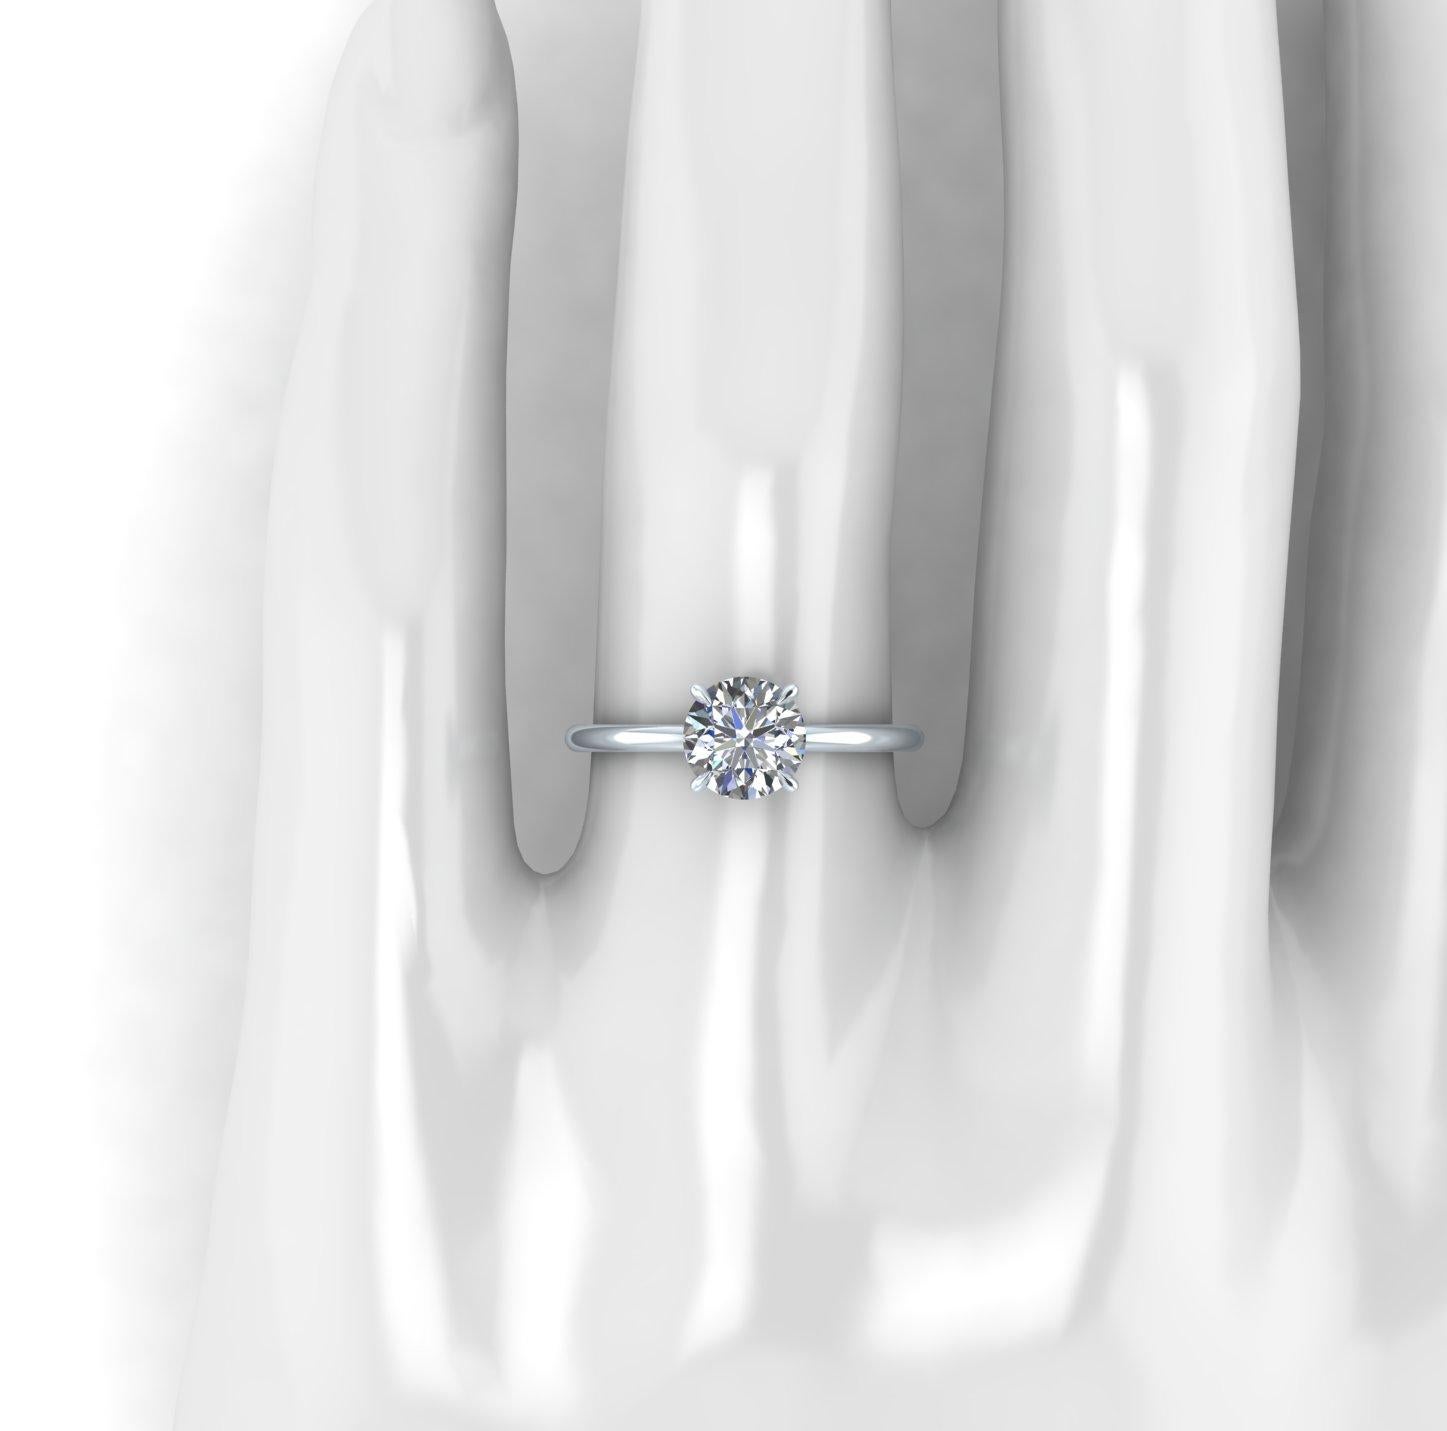 GIA Certified 1.01 Carat Round Diamond in Thin, Minimal Low Setting Platinum In New Condition For Sale In New York, NY